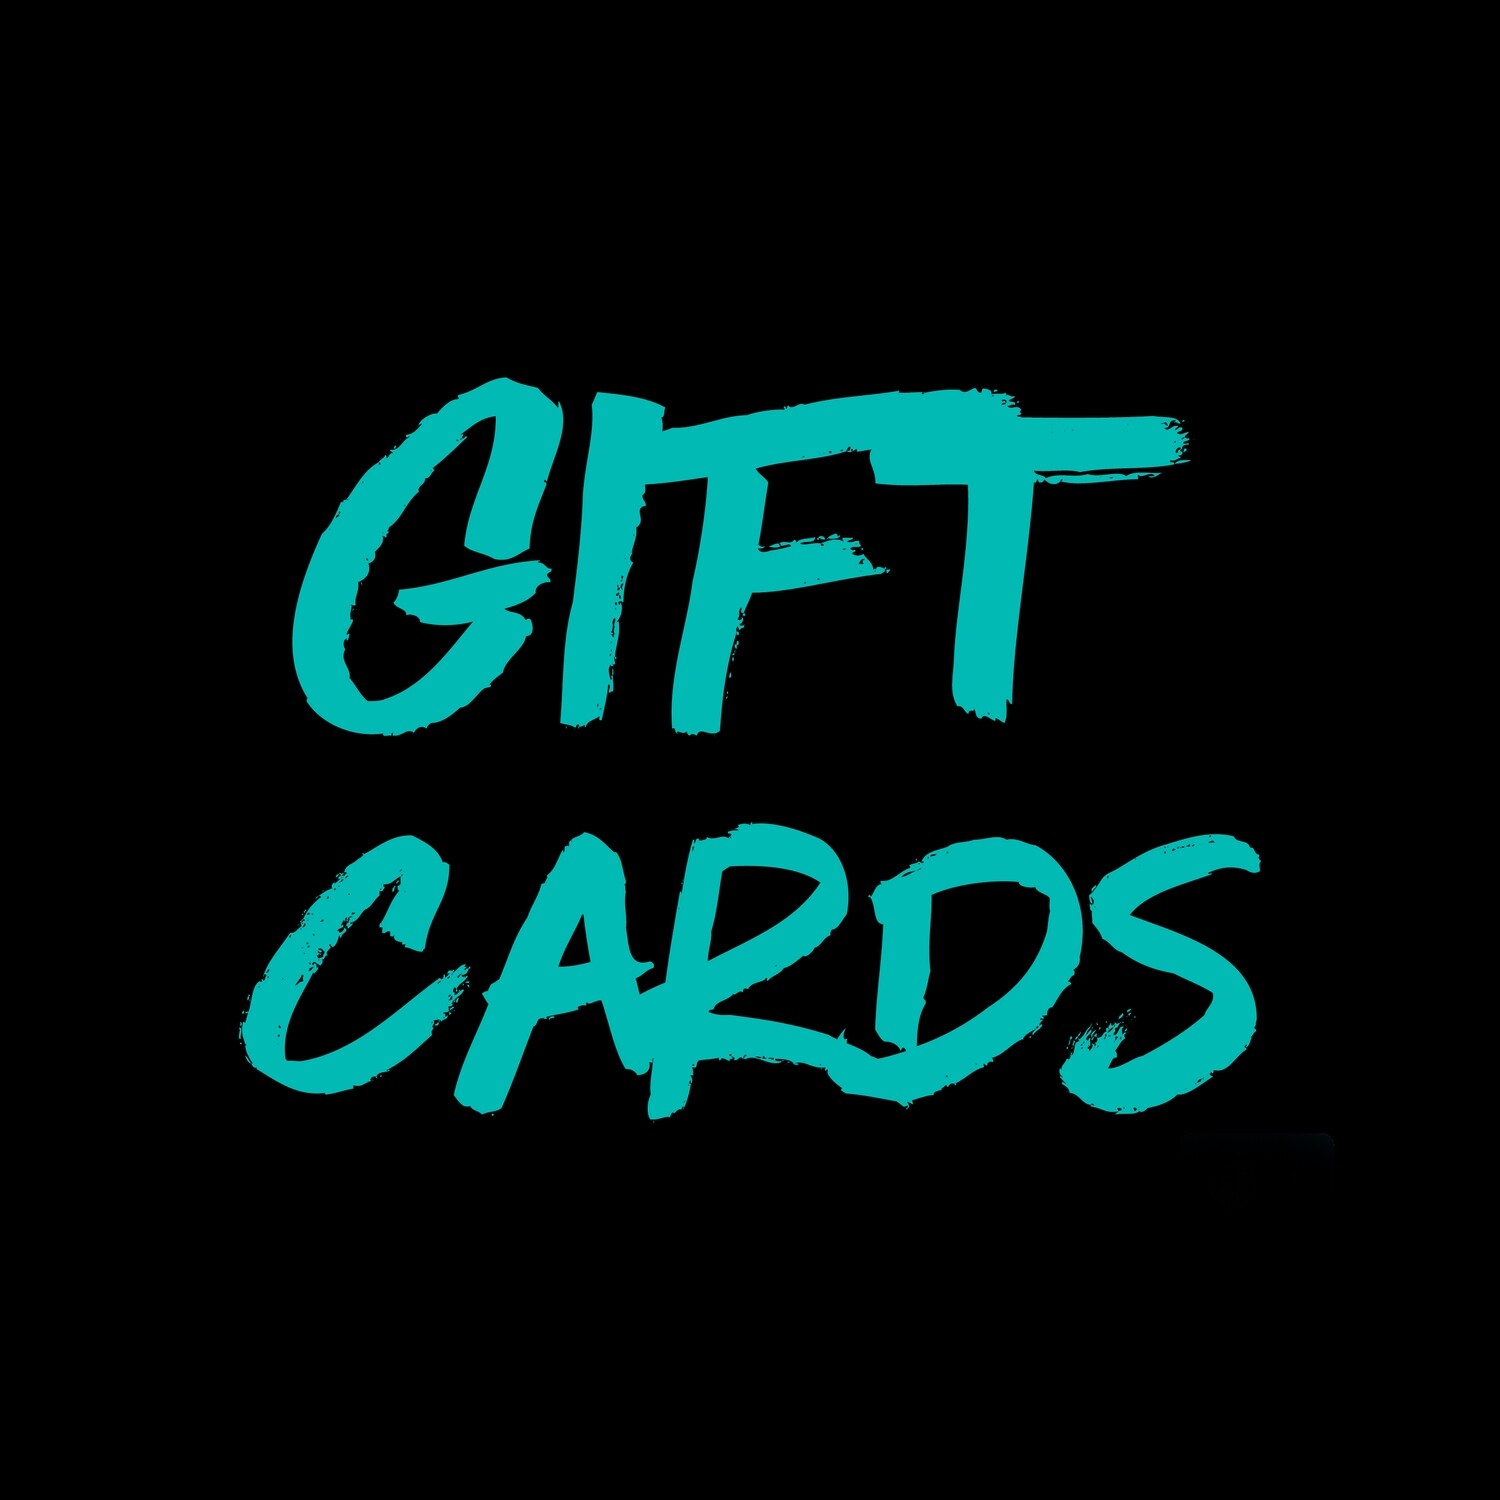 £10 Giftcard